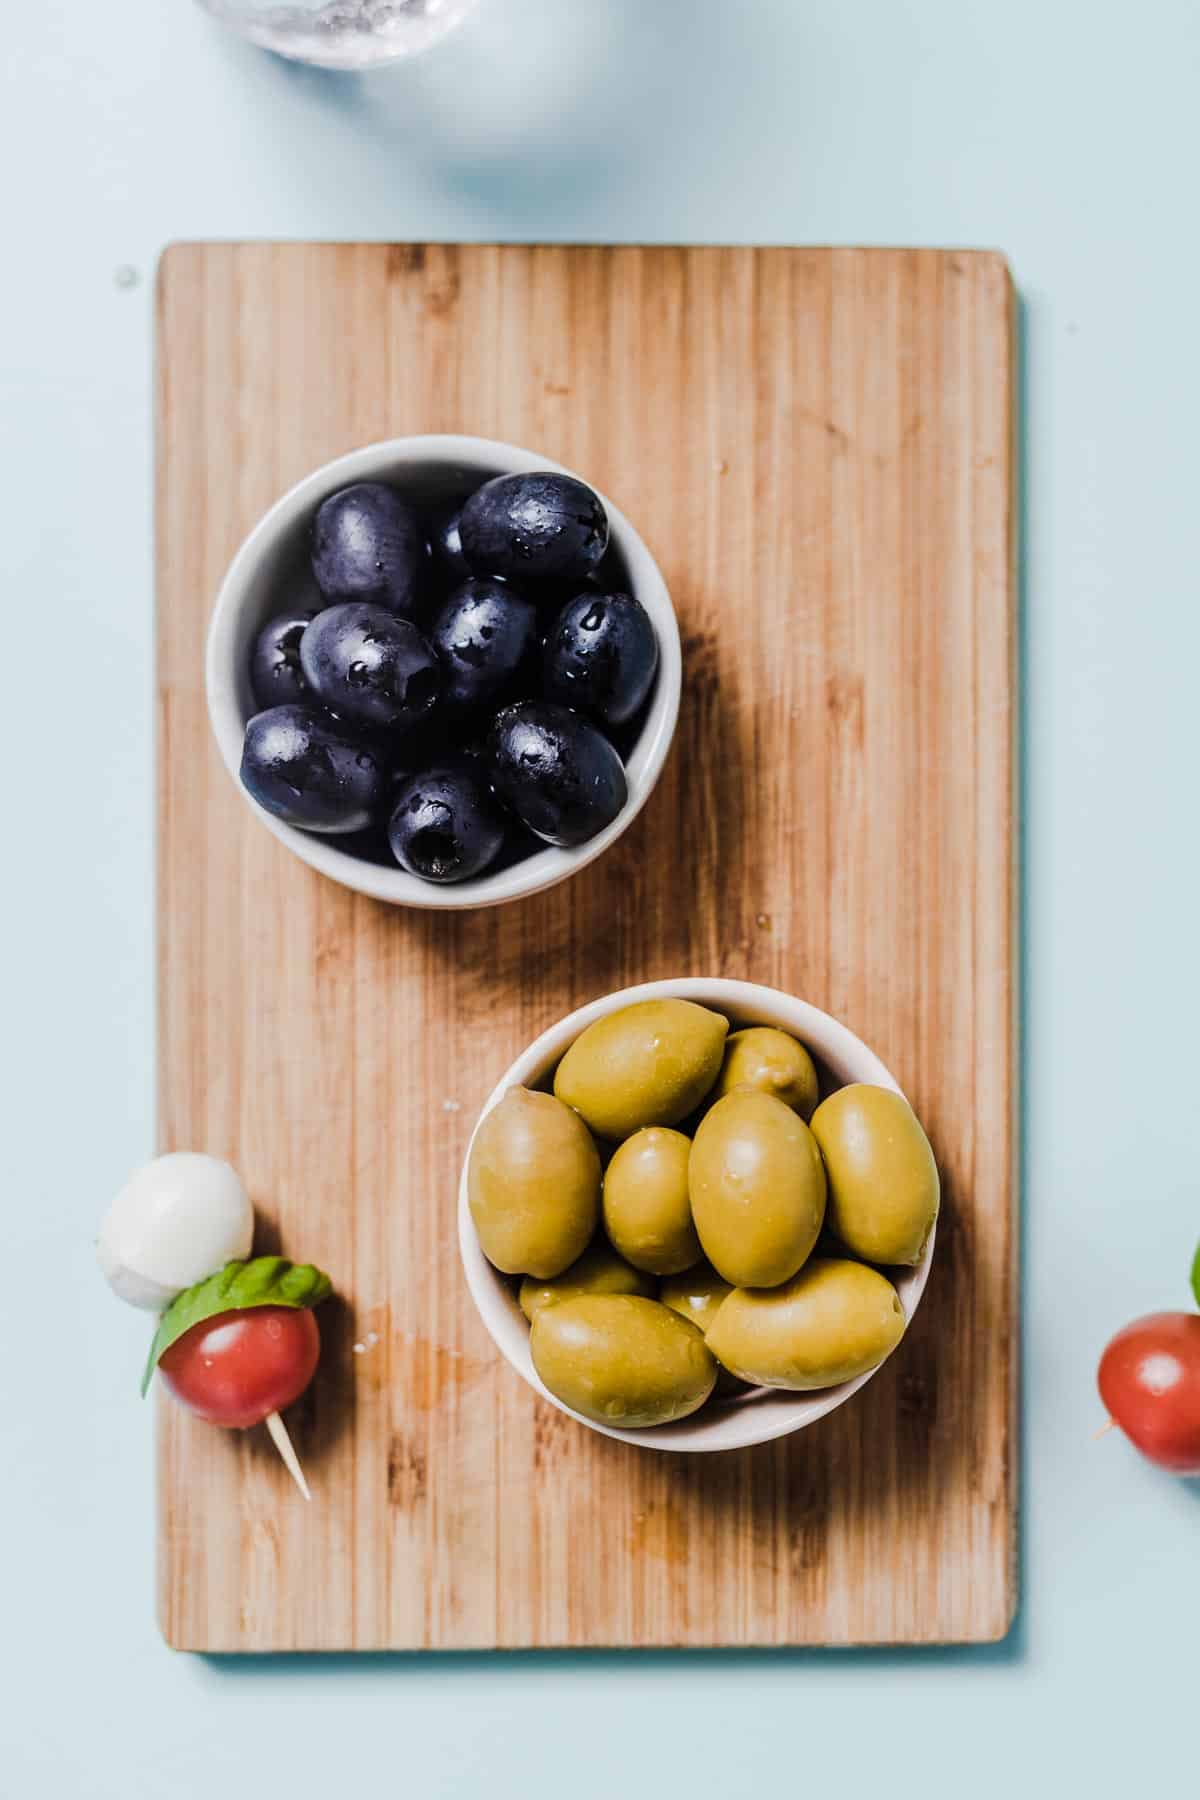 Birds eye view of green and black olives portioned in white bowls on a wooden cutting board.